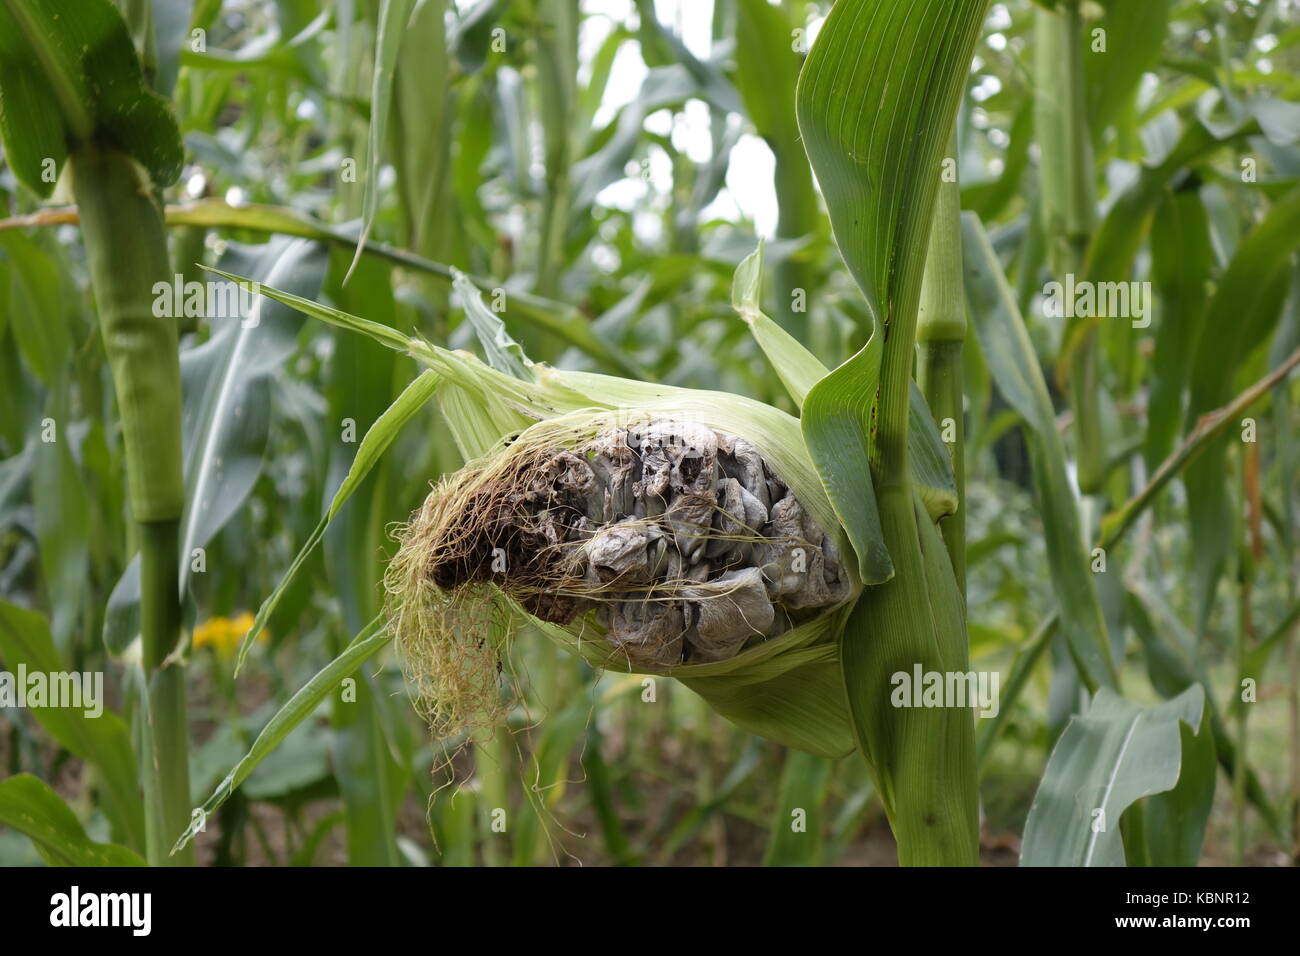 Corn cob infected by Corn smut (Ustilago maydis) fungus. It is as well edible and in Mexico considered delicacy. Stock Photo